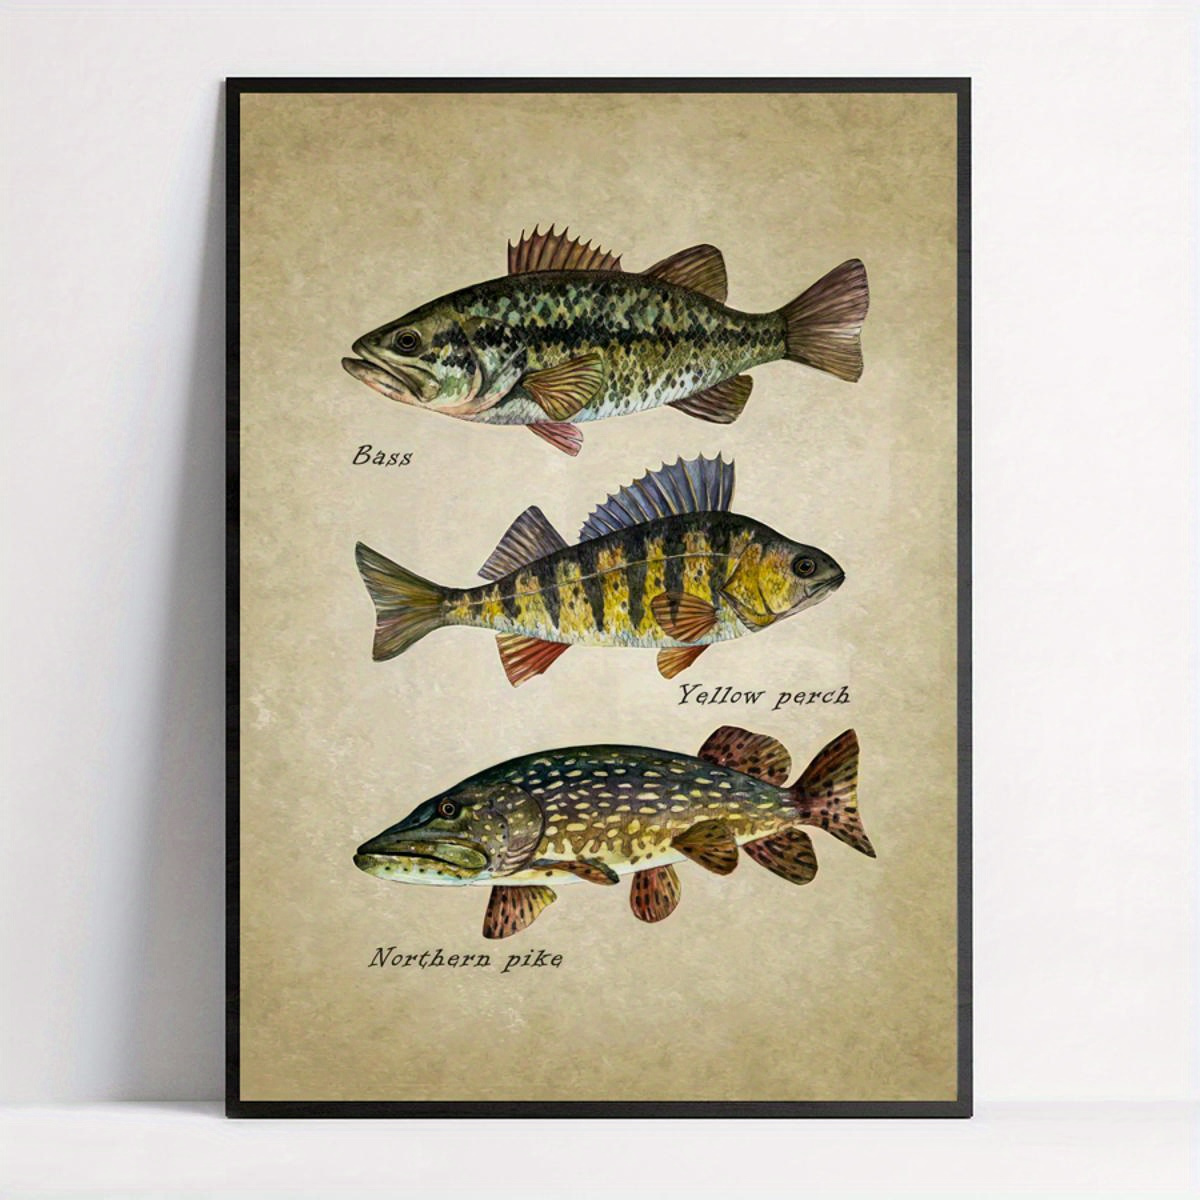 1pc Unframed Poster, Fish Art Print, Bass, Perch, Pike, Painting, Retro  Vintage Poster Style, Fishing Gift For Men, Garage Decor For Fisherman Wall  Ar